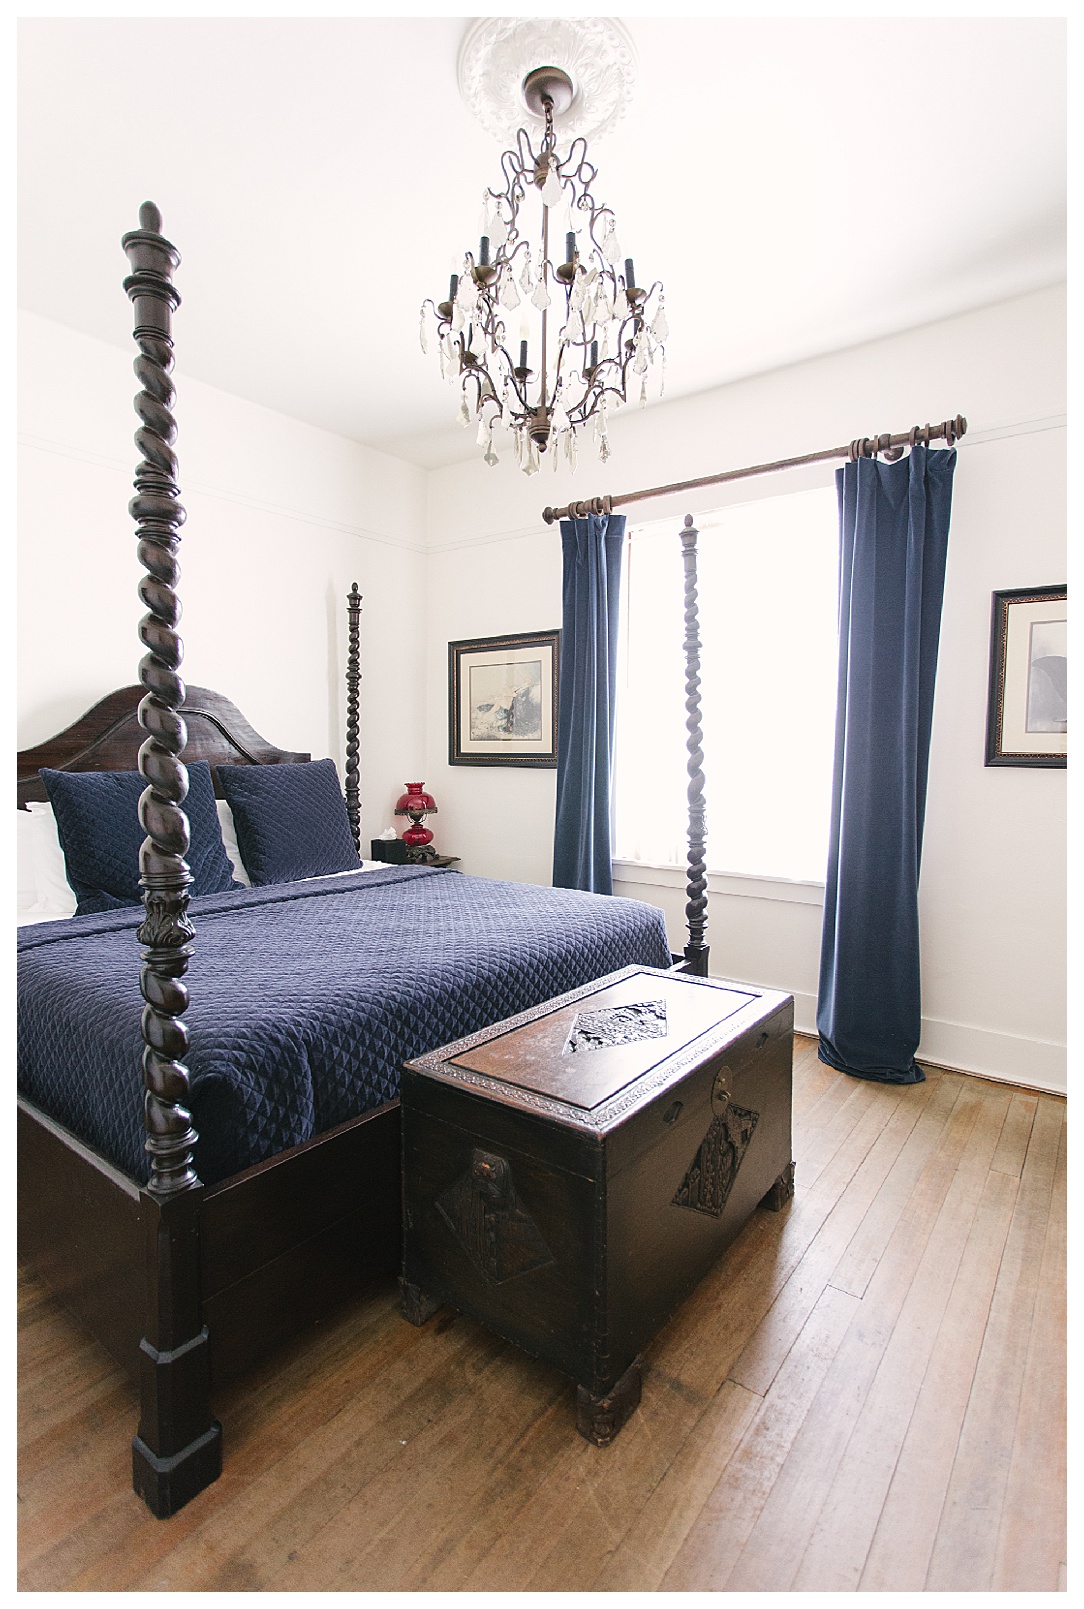 1880 Union Hotel - Lindsey Drewes Photography